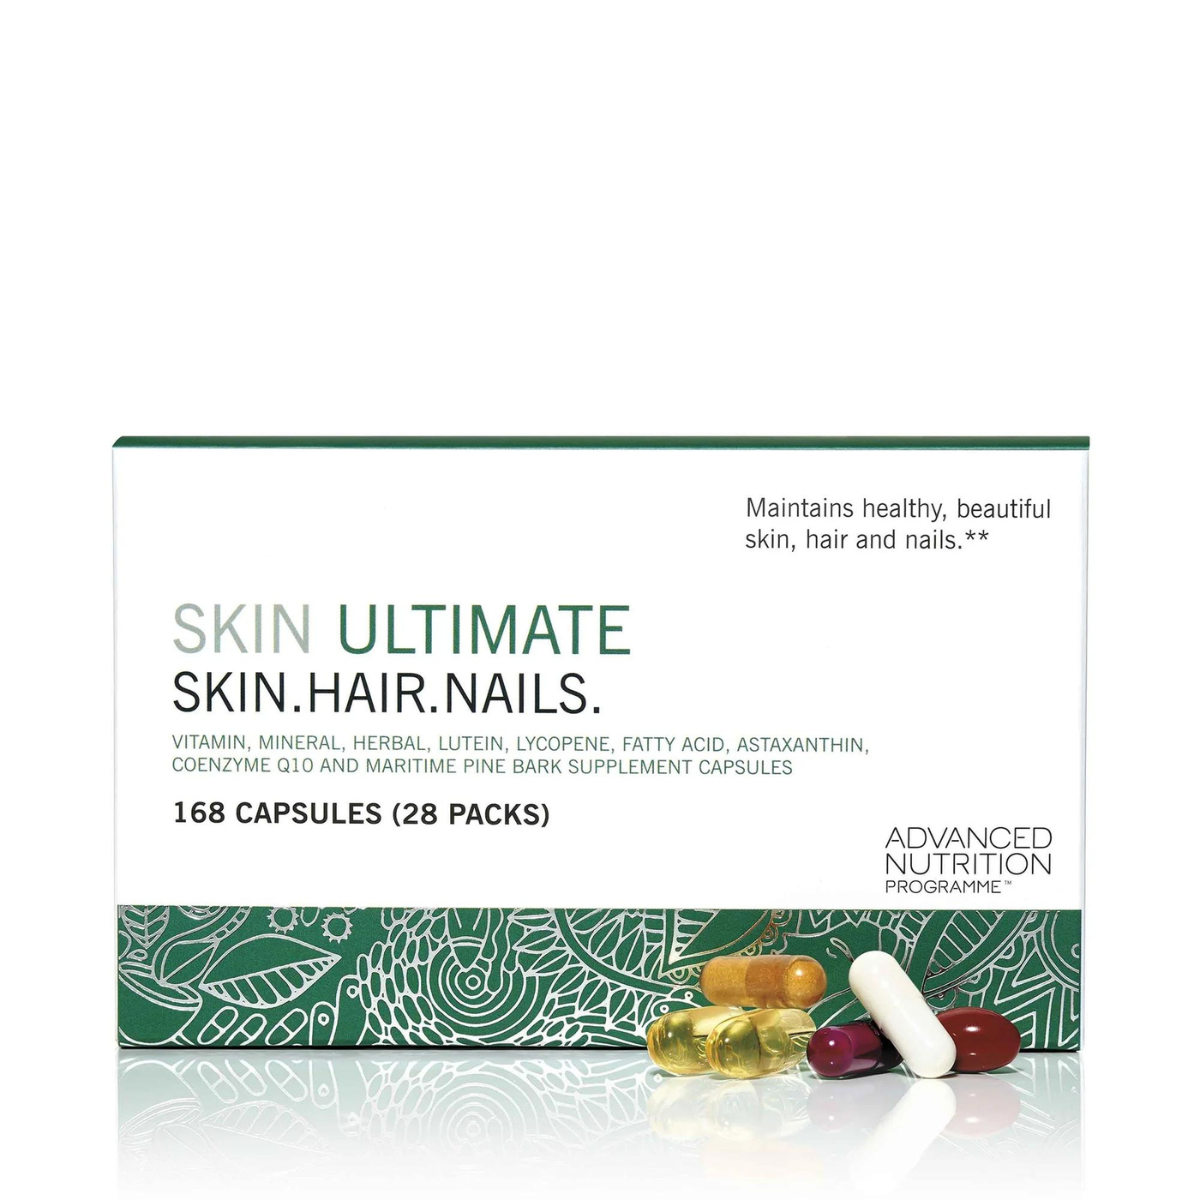 Jane Iredale Skin Ultimate for Skin, Hair, and Nails - 168 Capsules